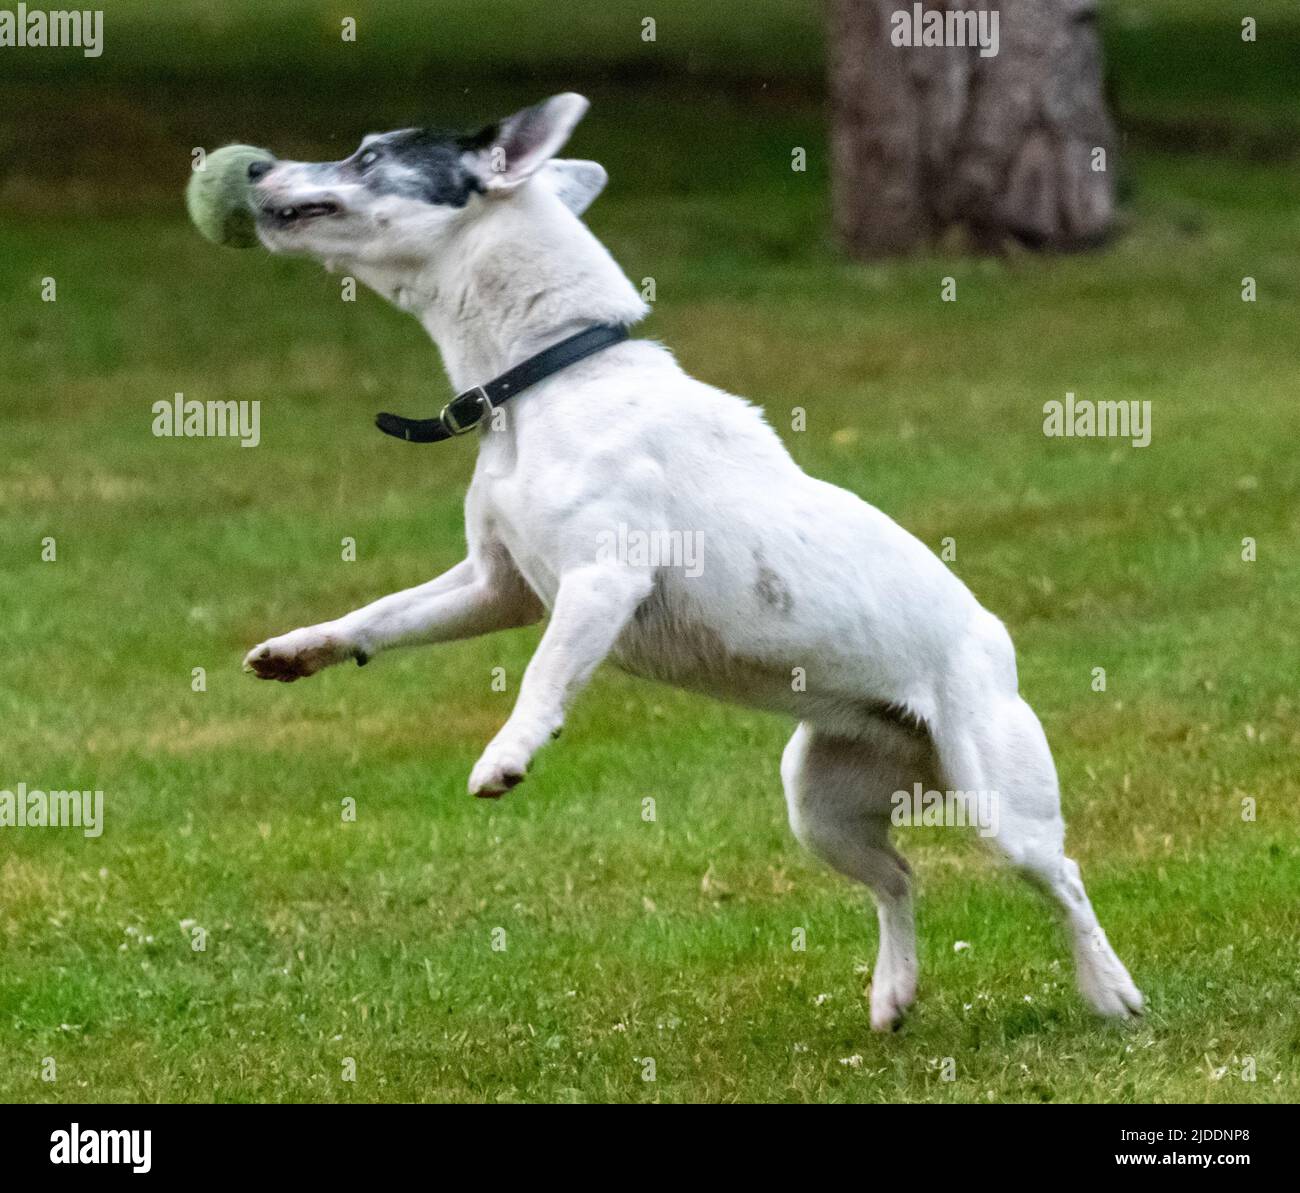 A white coated Jack Russel jumping for a tennis ball on a summers day, caught in mid flow catching the ball Stock Photo